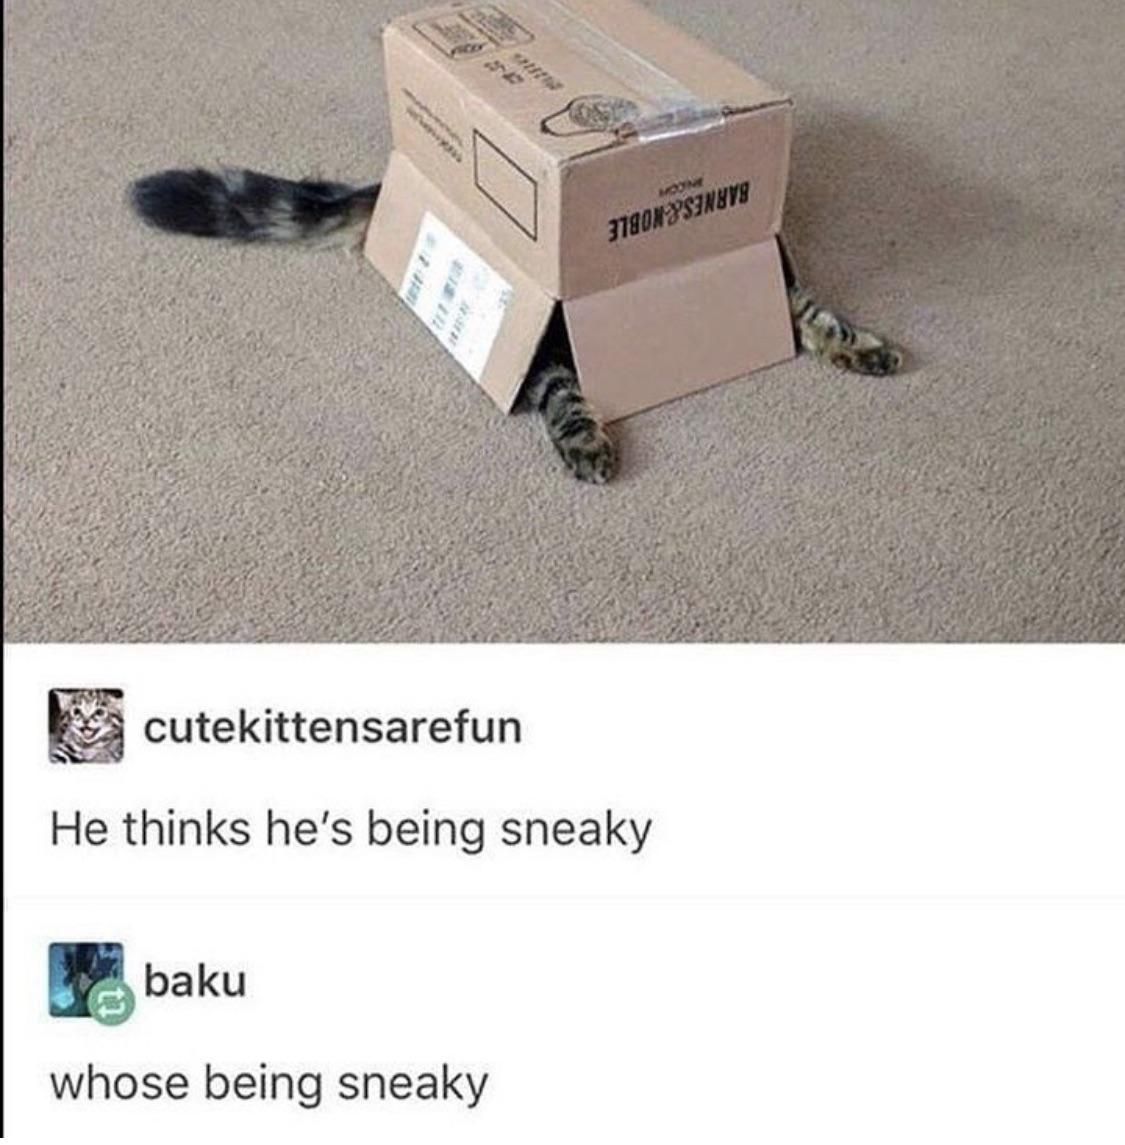 There’s just a box